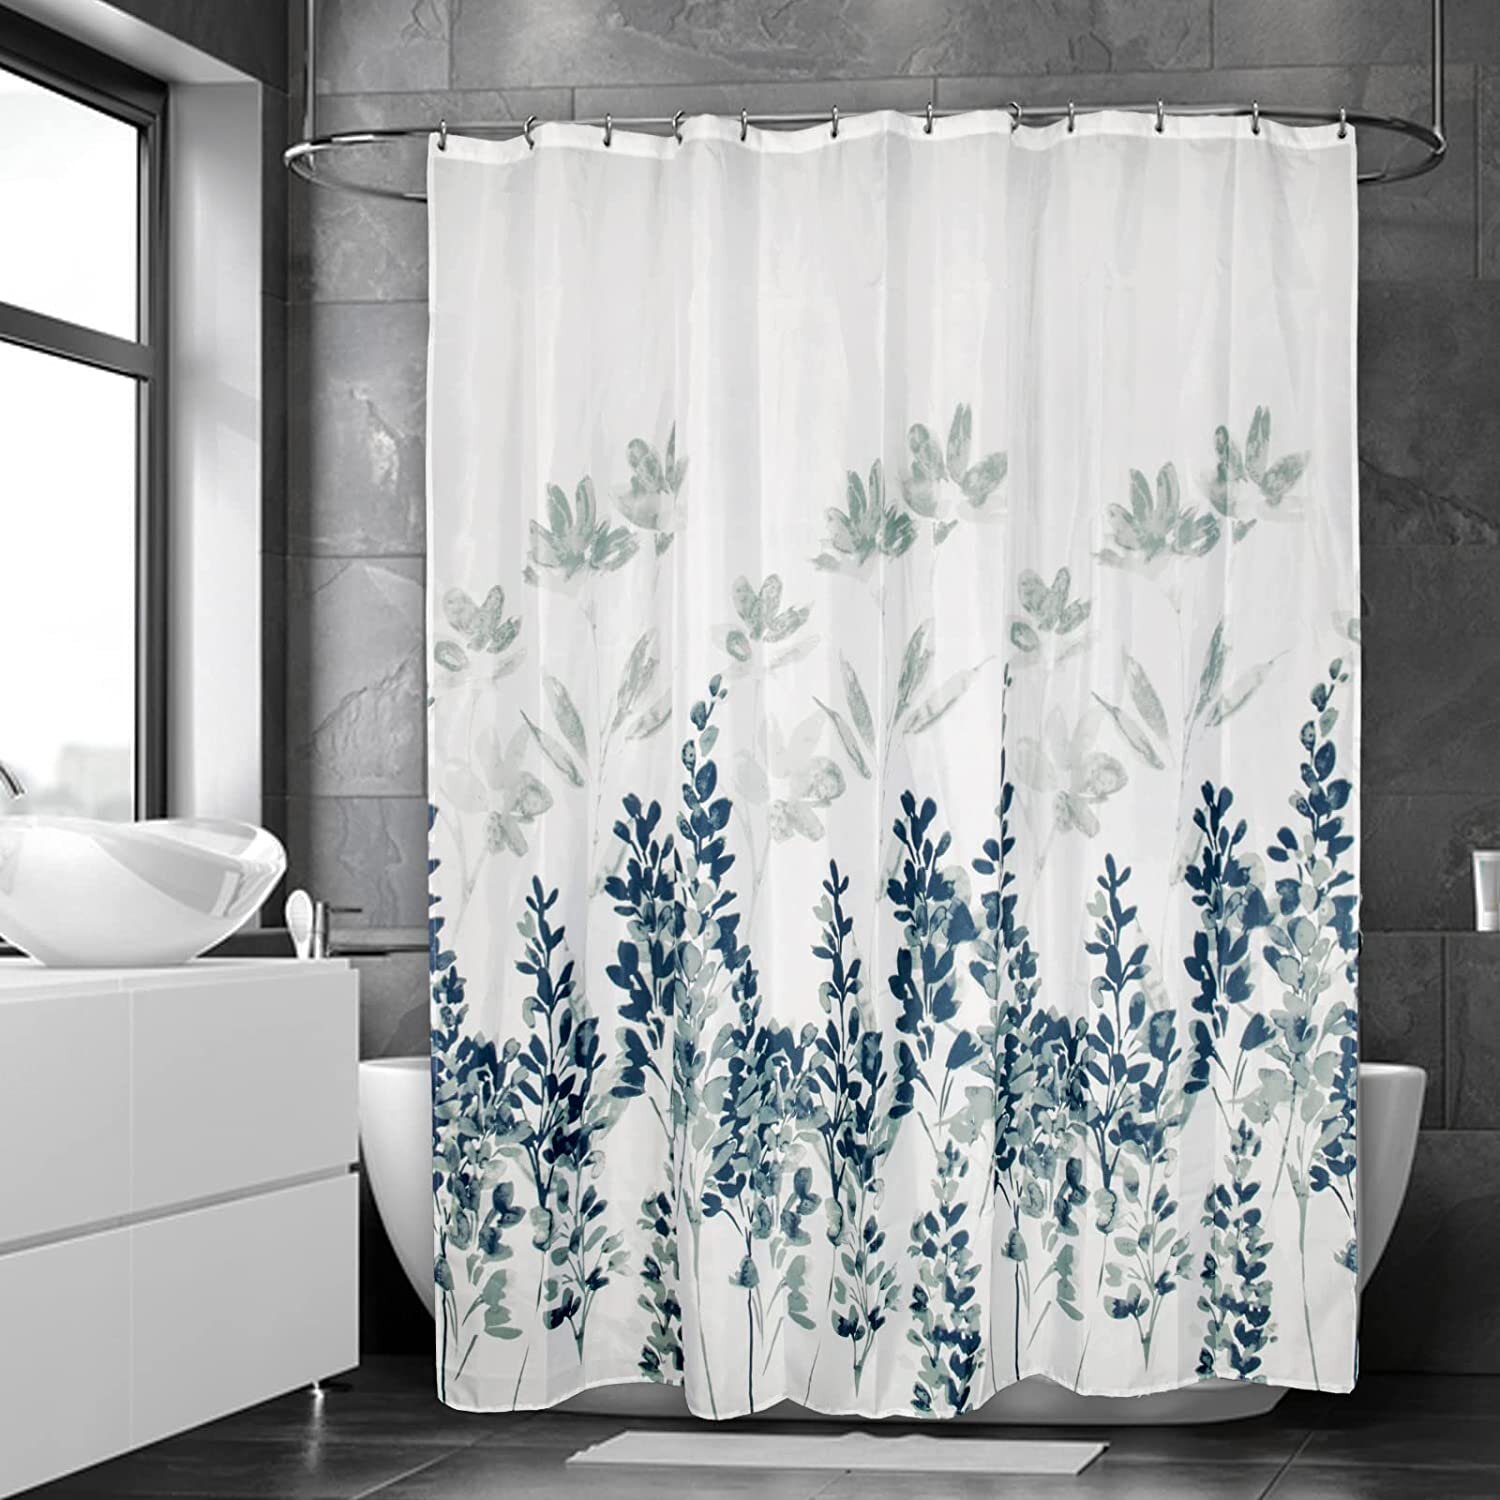 Shower Curtain for Bathroom Waterproof Flower Curtain with 12 Hooks Home Decor 